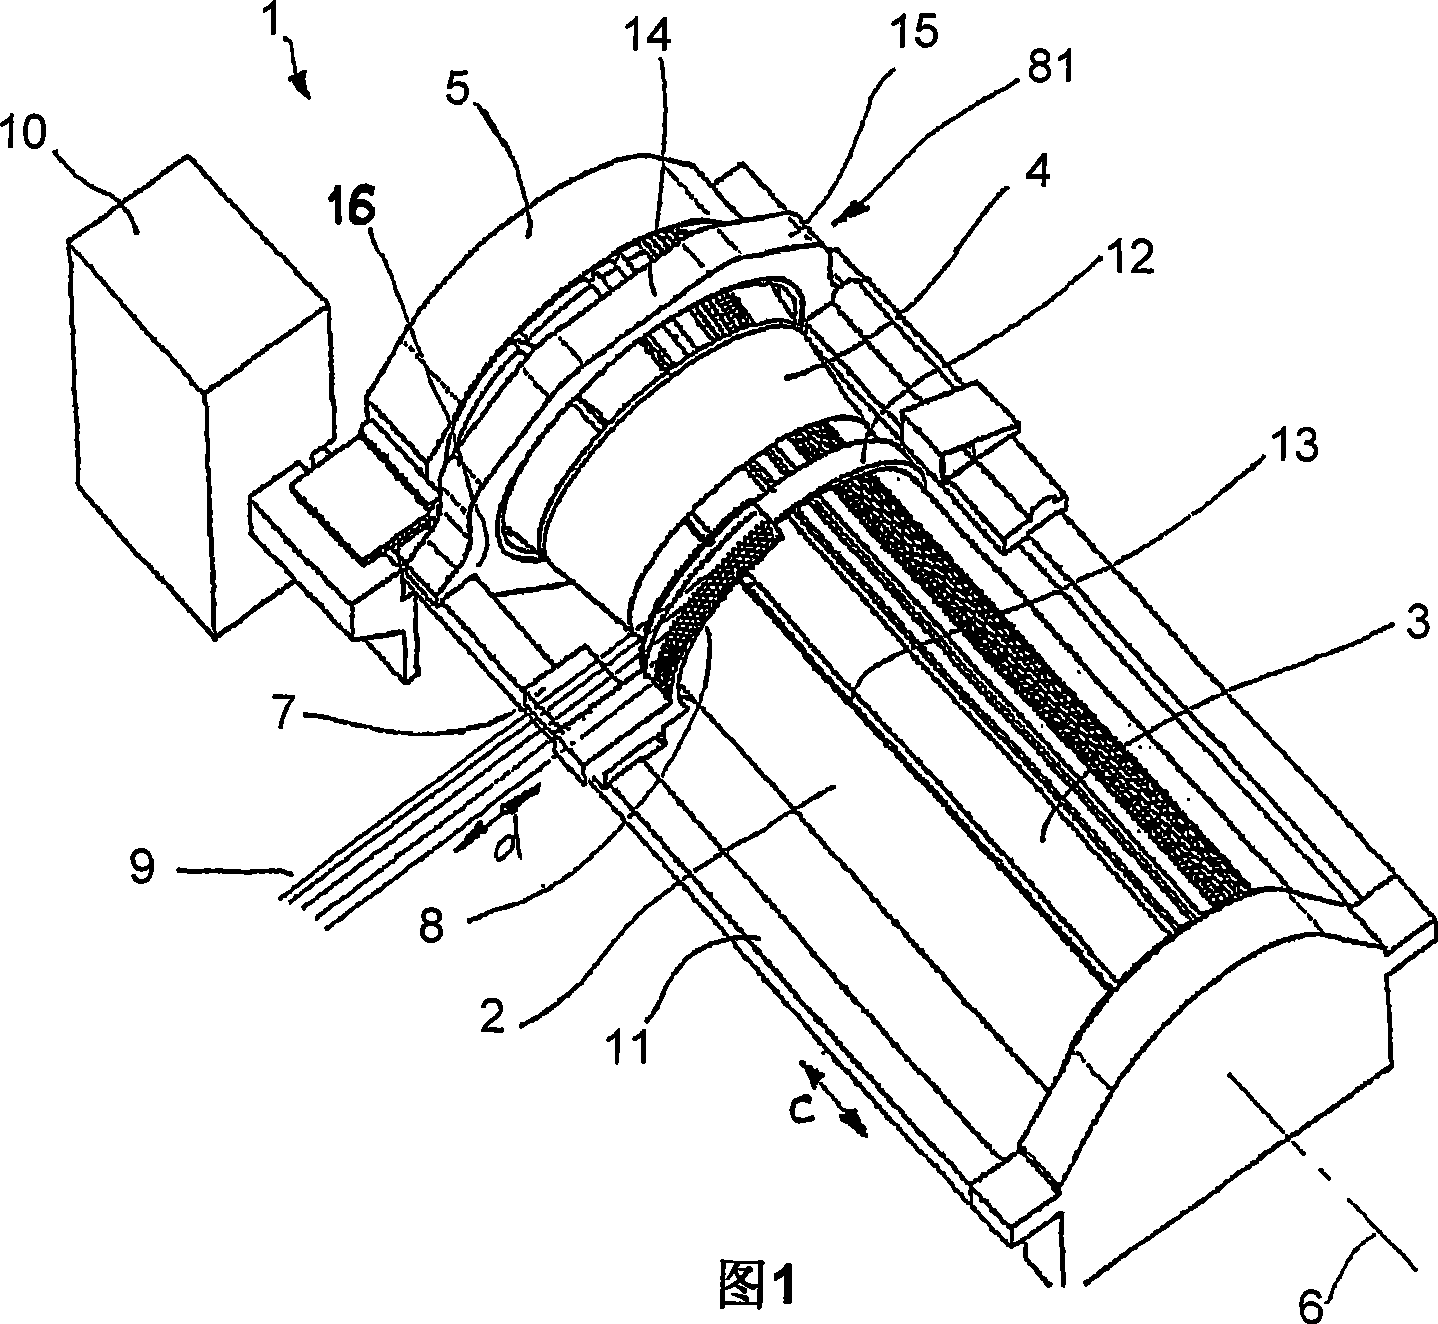 Method and device for thread distribution in a warping frame